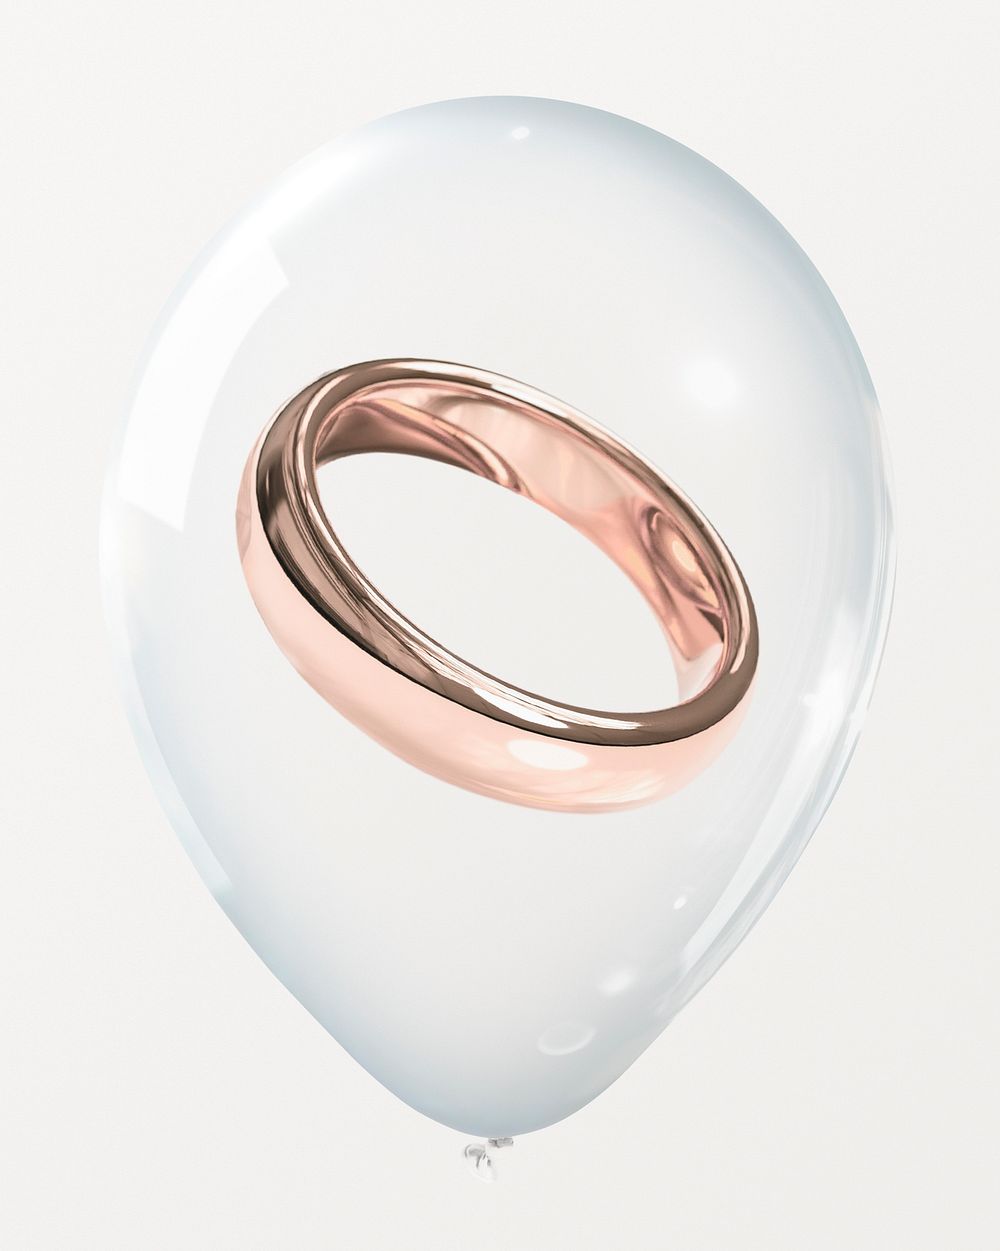 Rose gold ring in clear balloon, wedding concept